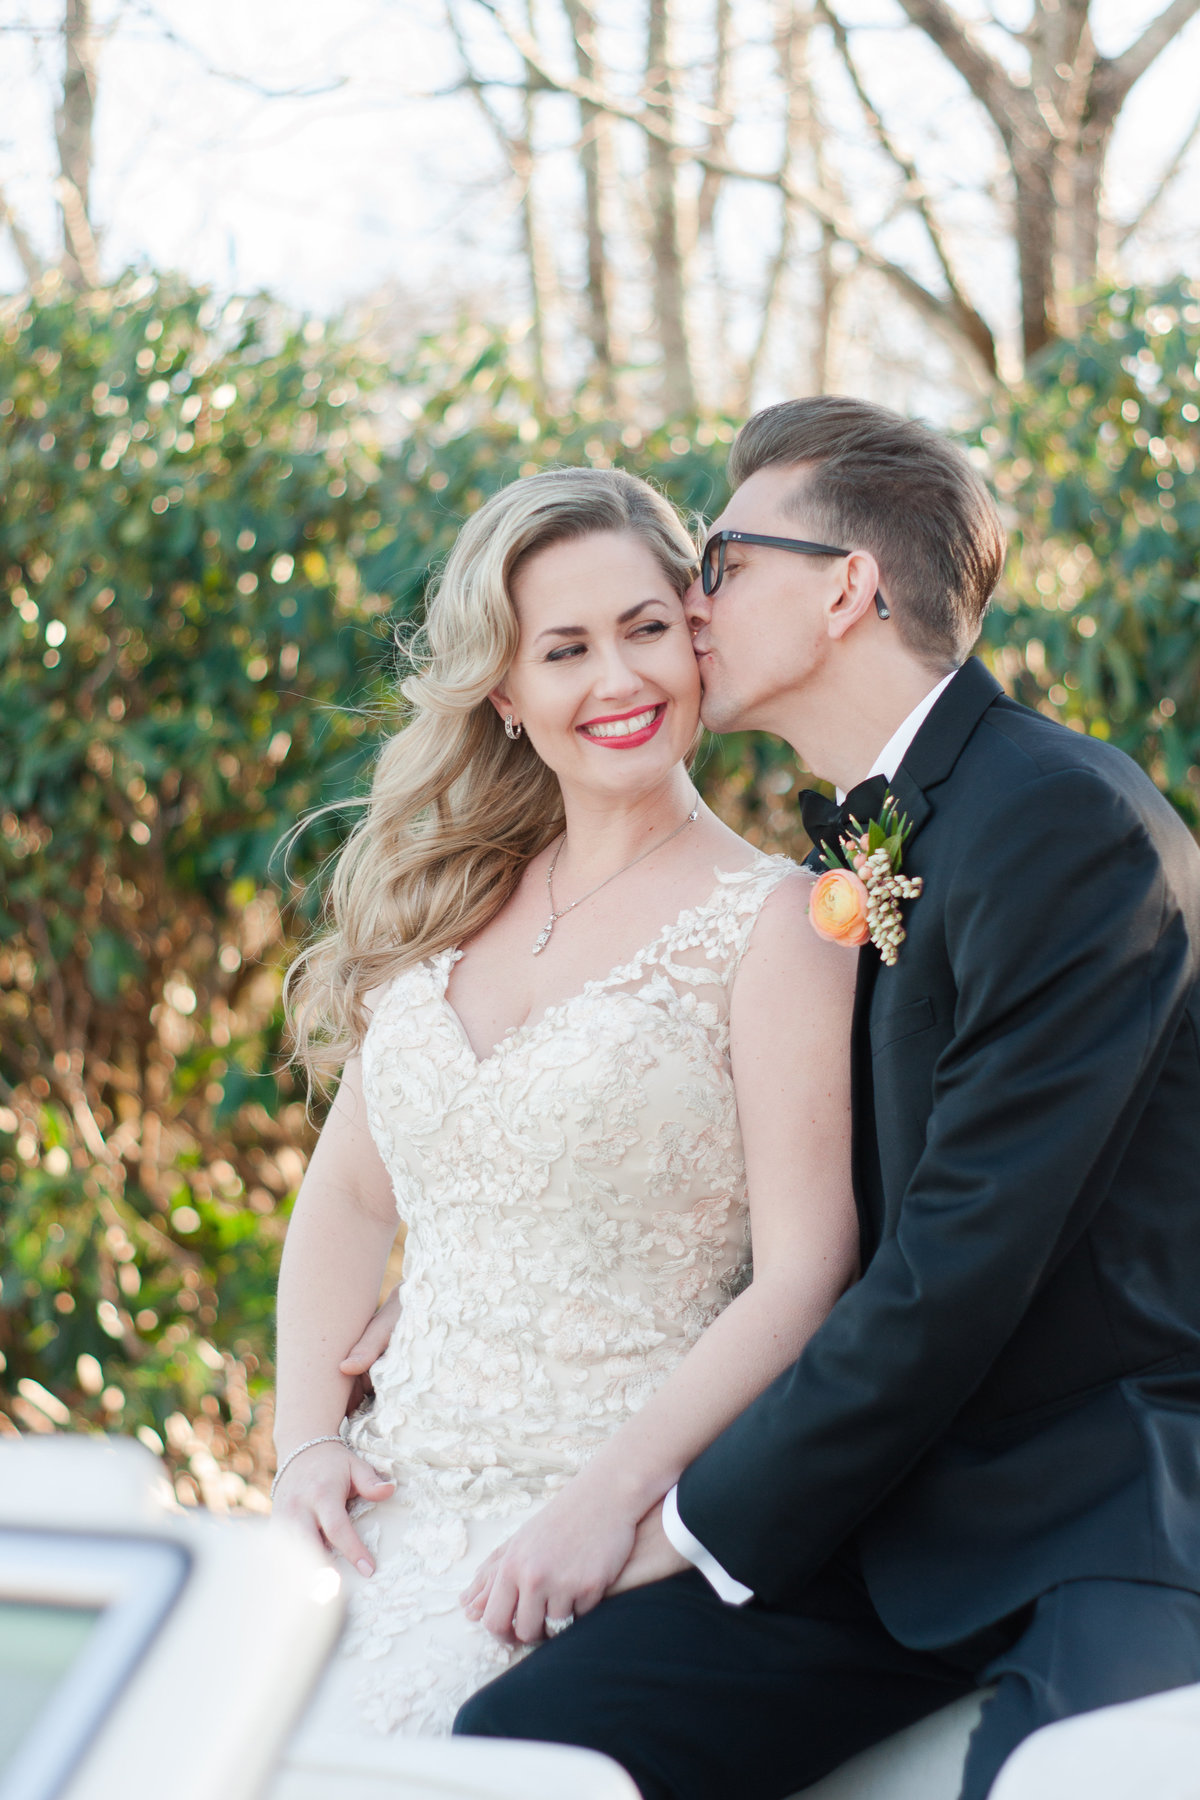 Glamourous wedding inspiration photographed at Westglow Mansion by Boone Wedding Photographer Wayfaring Wanderer. Westglow Mansion is a beautiful venue in Blowing Rock, NC.